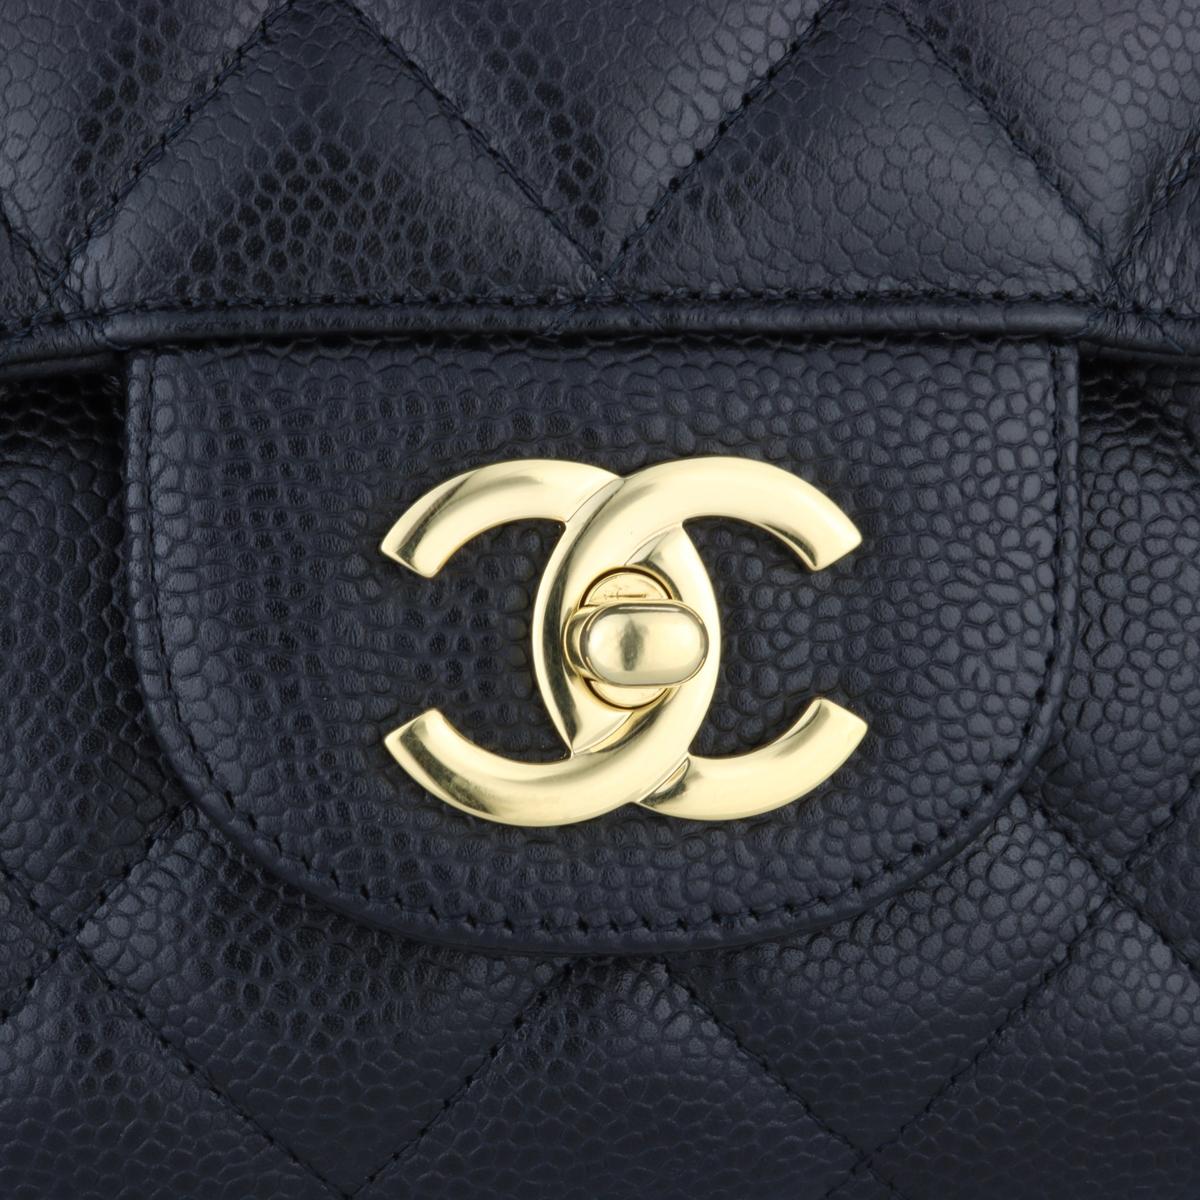 Women's or Men's CHANEL Single Flap Jumbo Bag Black Caviar with Gold Hardware 2010 For Sale